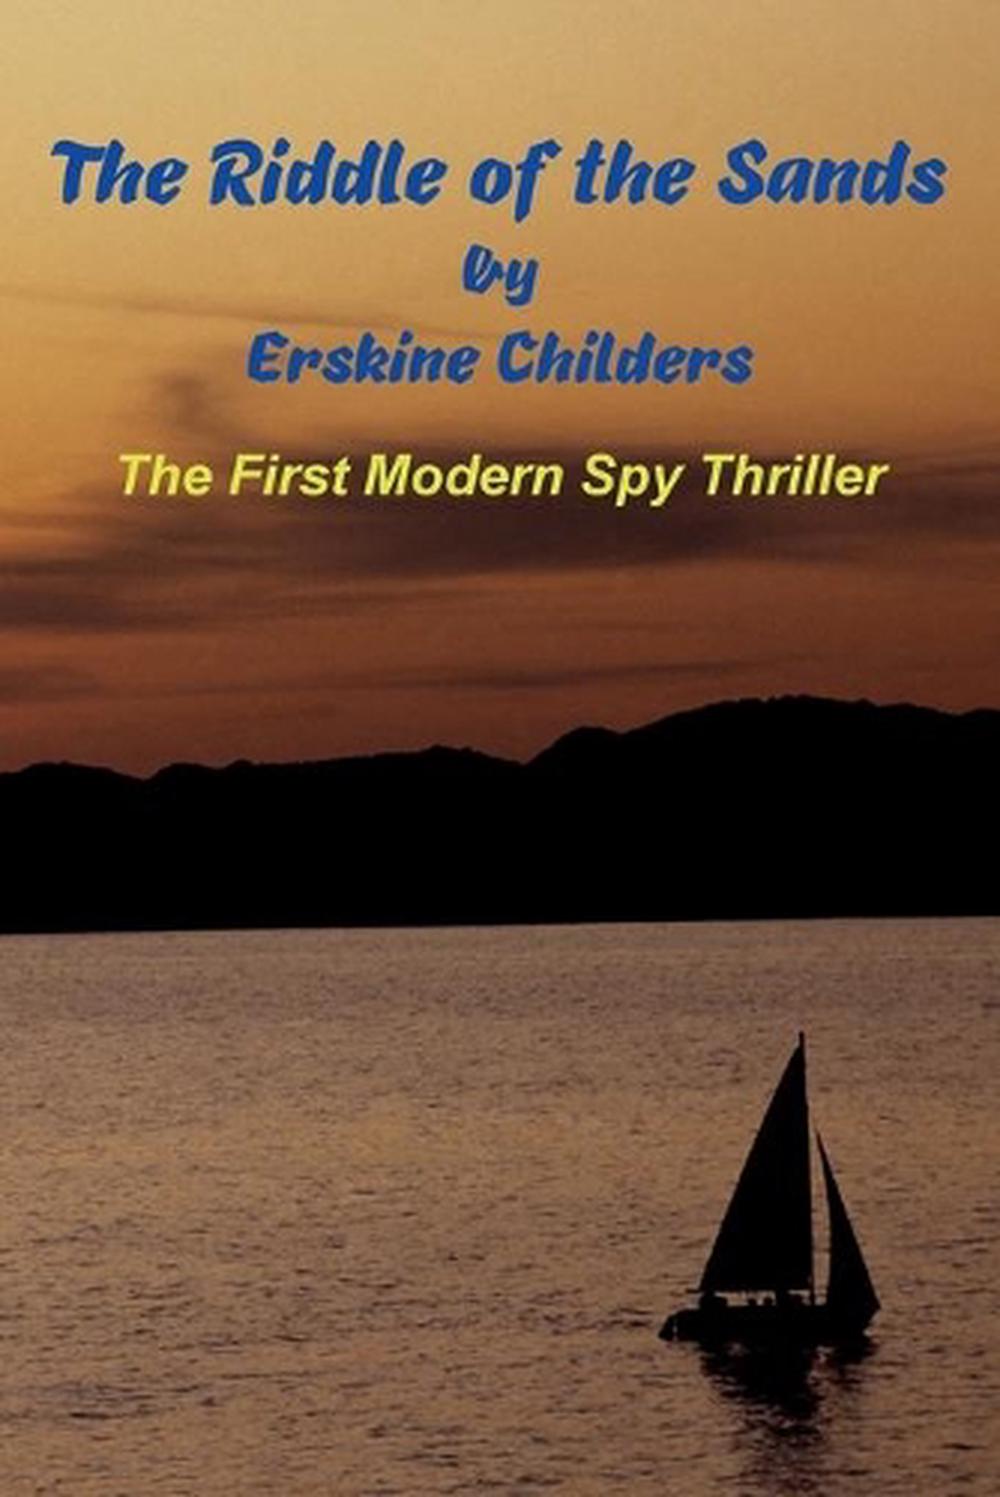 The Riddle of the Sands by Erskine Childer